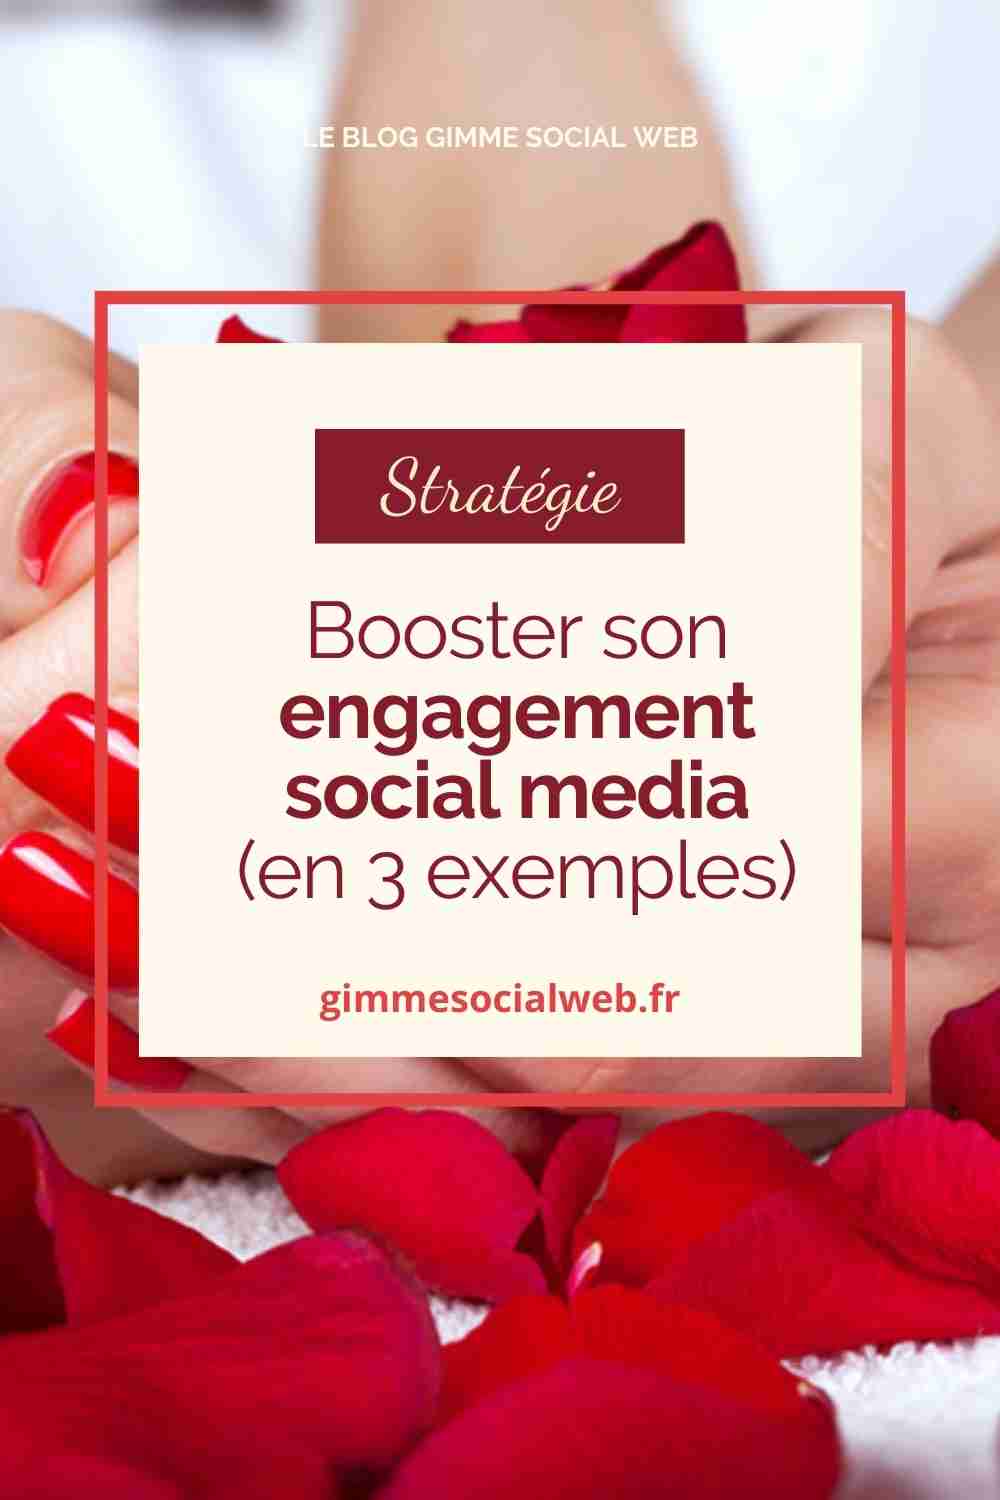 Booster son engagement social media : 3 exemples